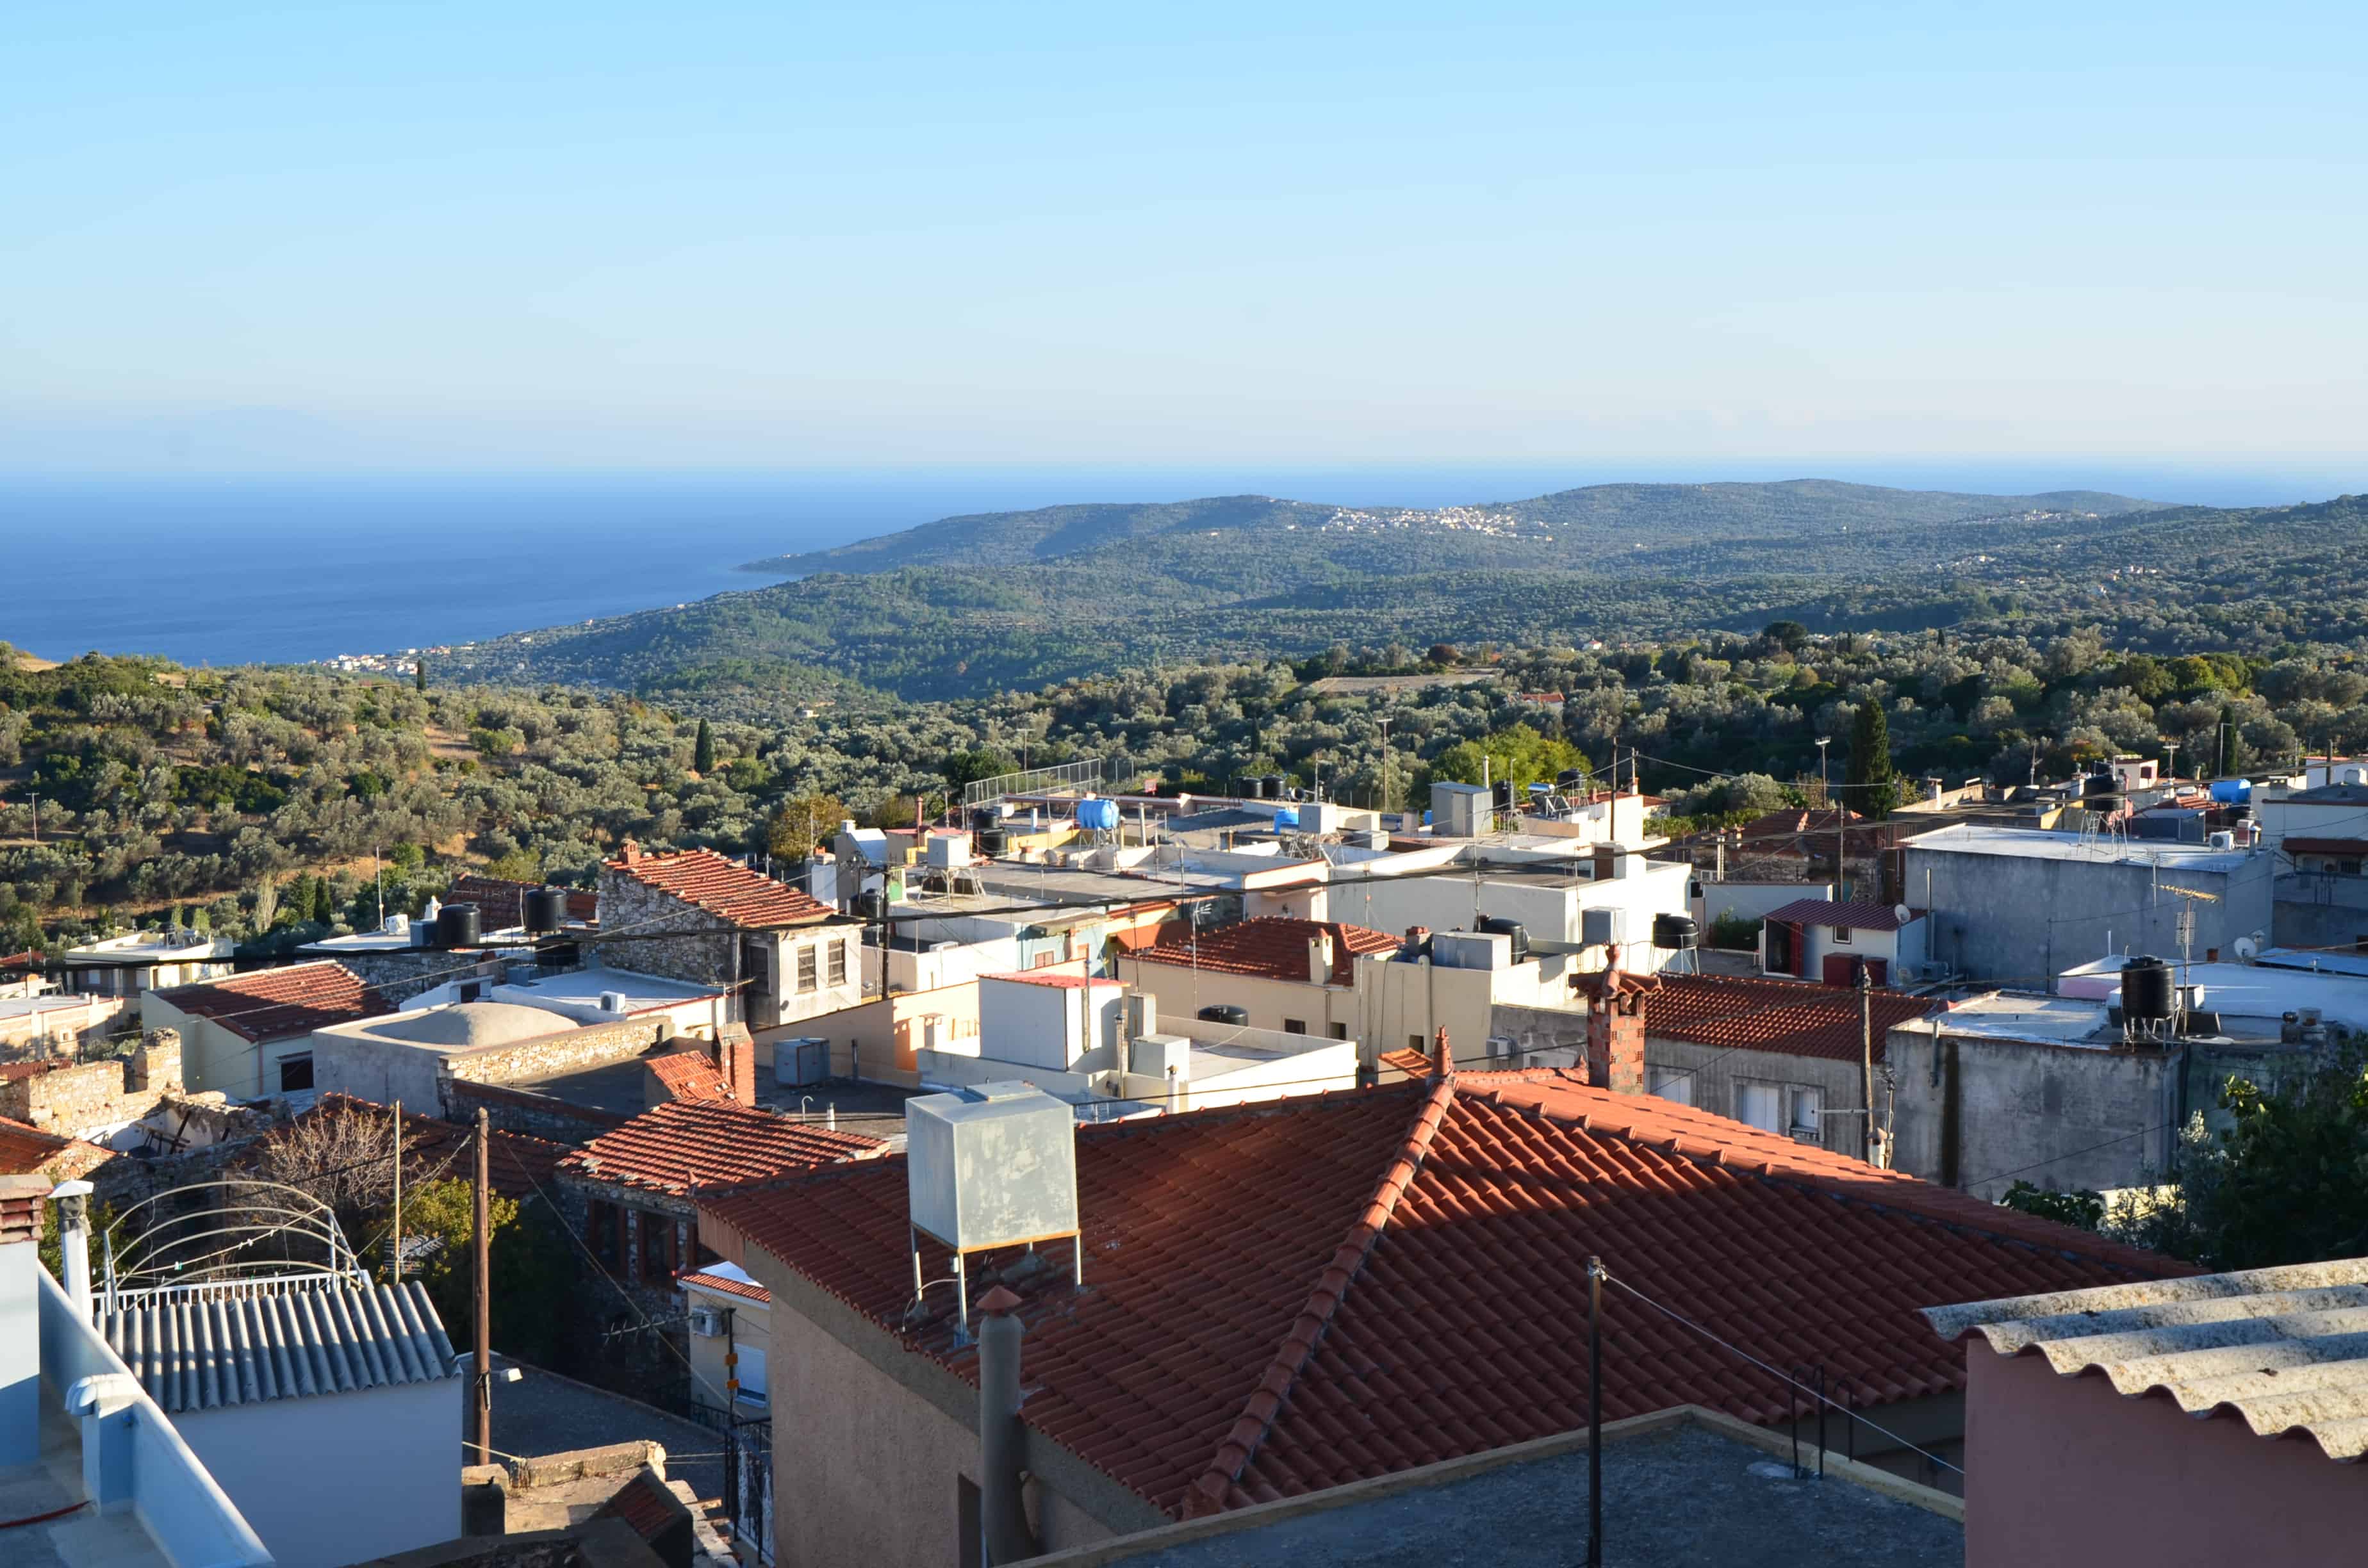 View from the upper village in Tholopotami, Chios, Greece